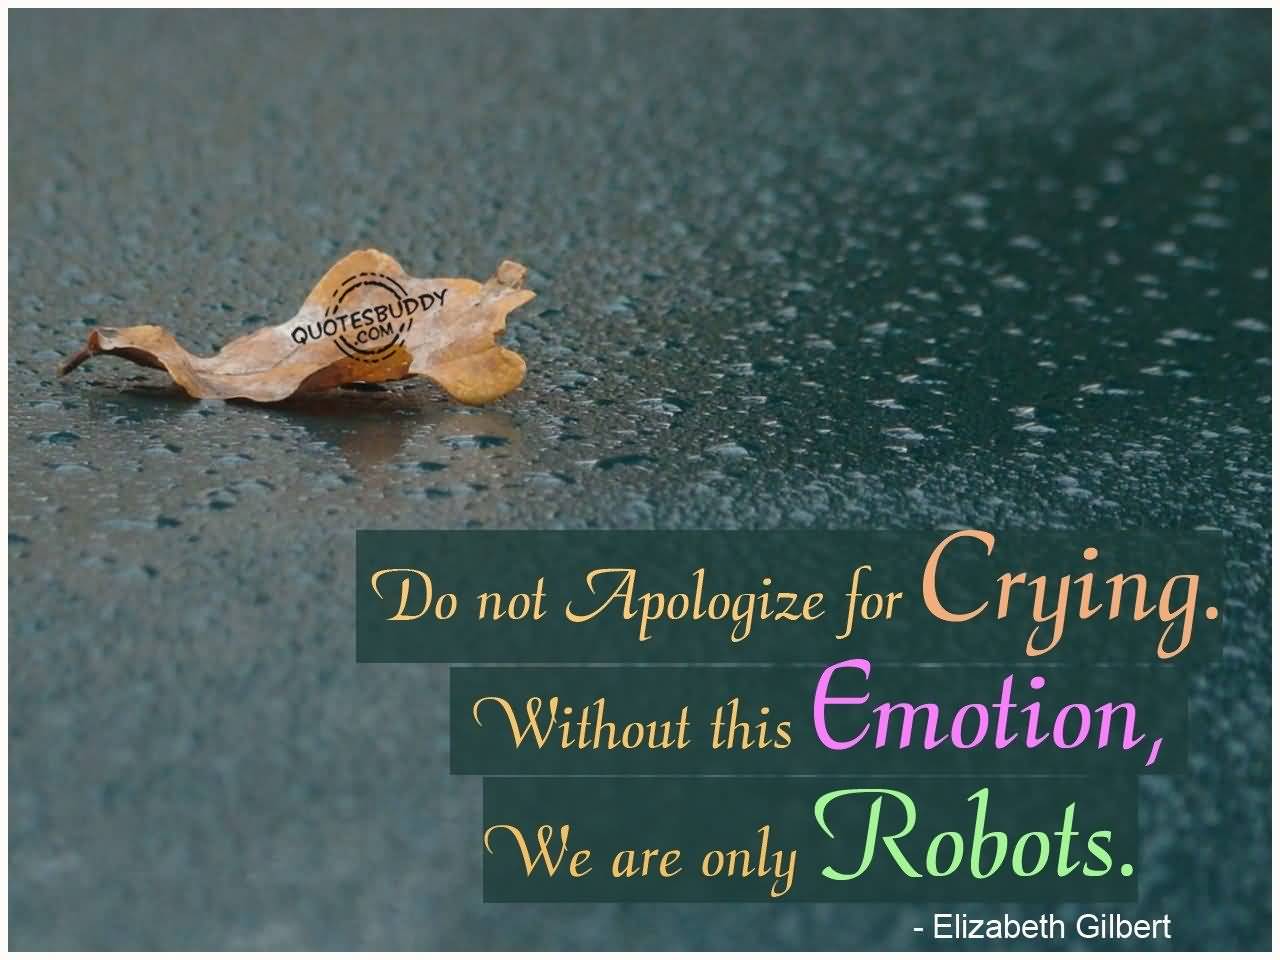 Do not apologize for crying. Without this emotion, we are only robots. - Elizabeth Gilbert